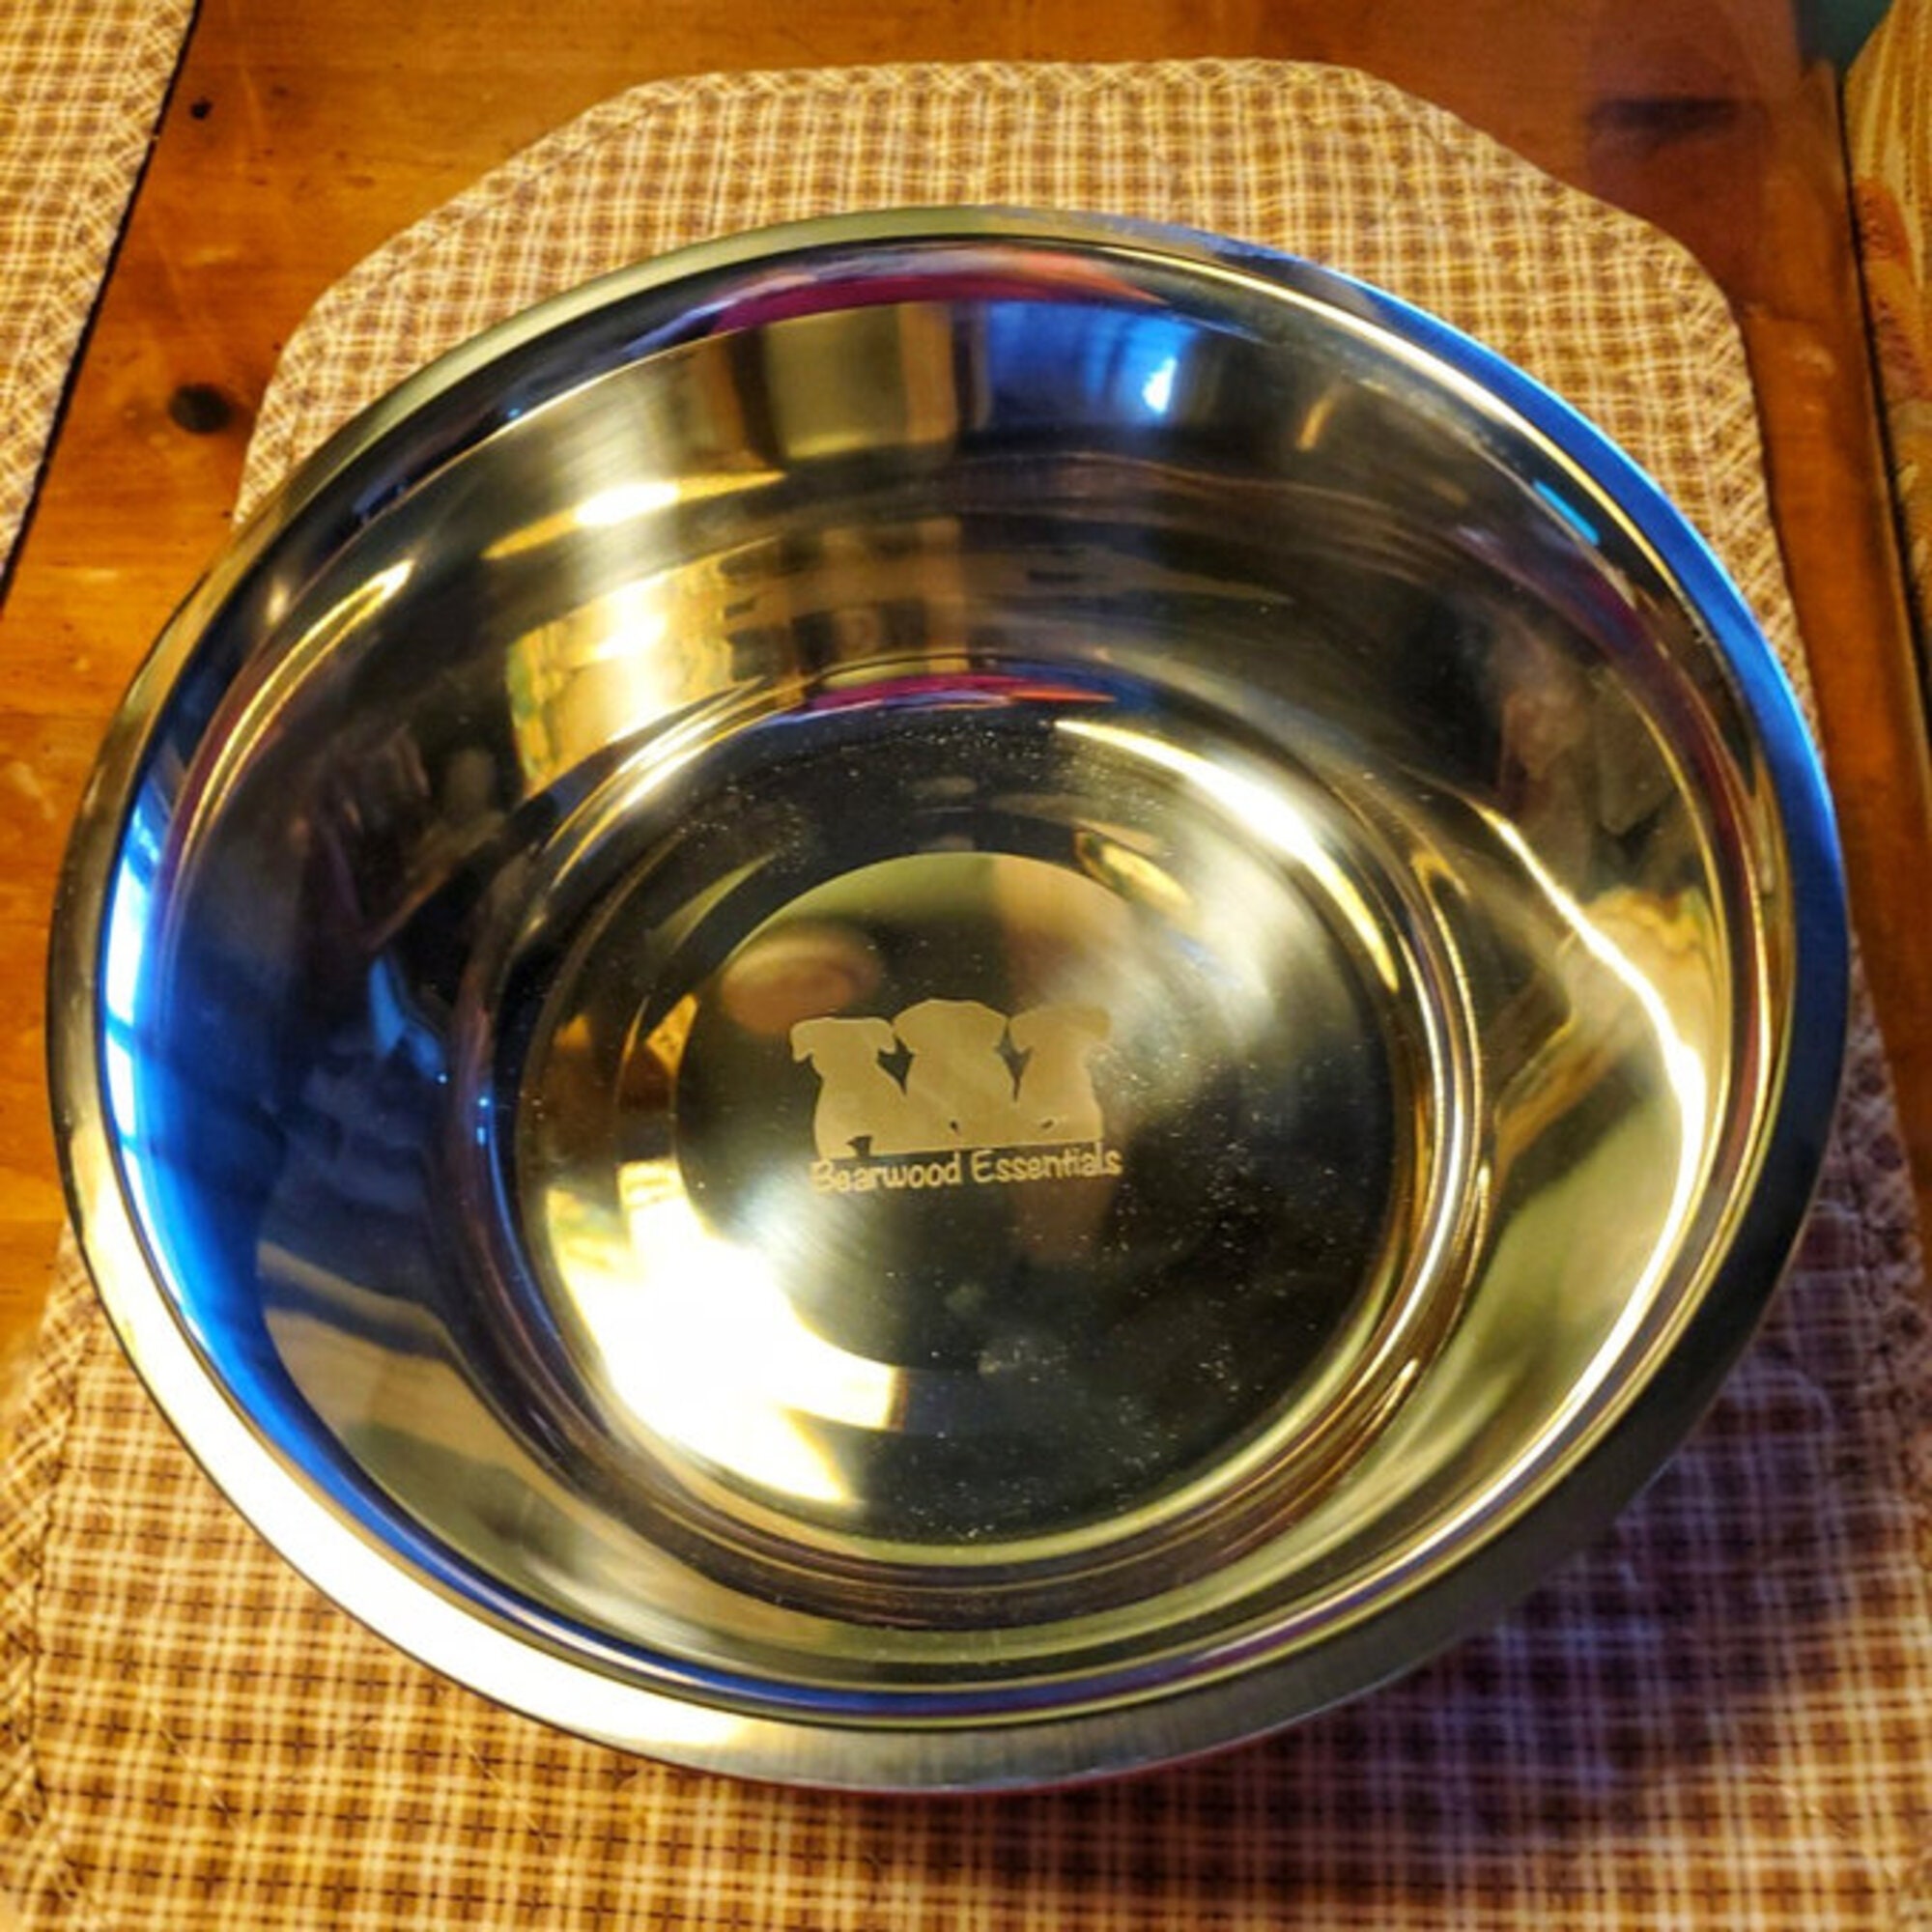 Stainless Steel Metal Slow Feed Bowl non-tip Style Stops Dog Food Gulping,  Bloat, Indigestion, and Rapid Eating 